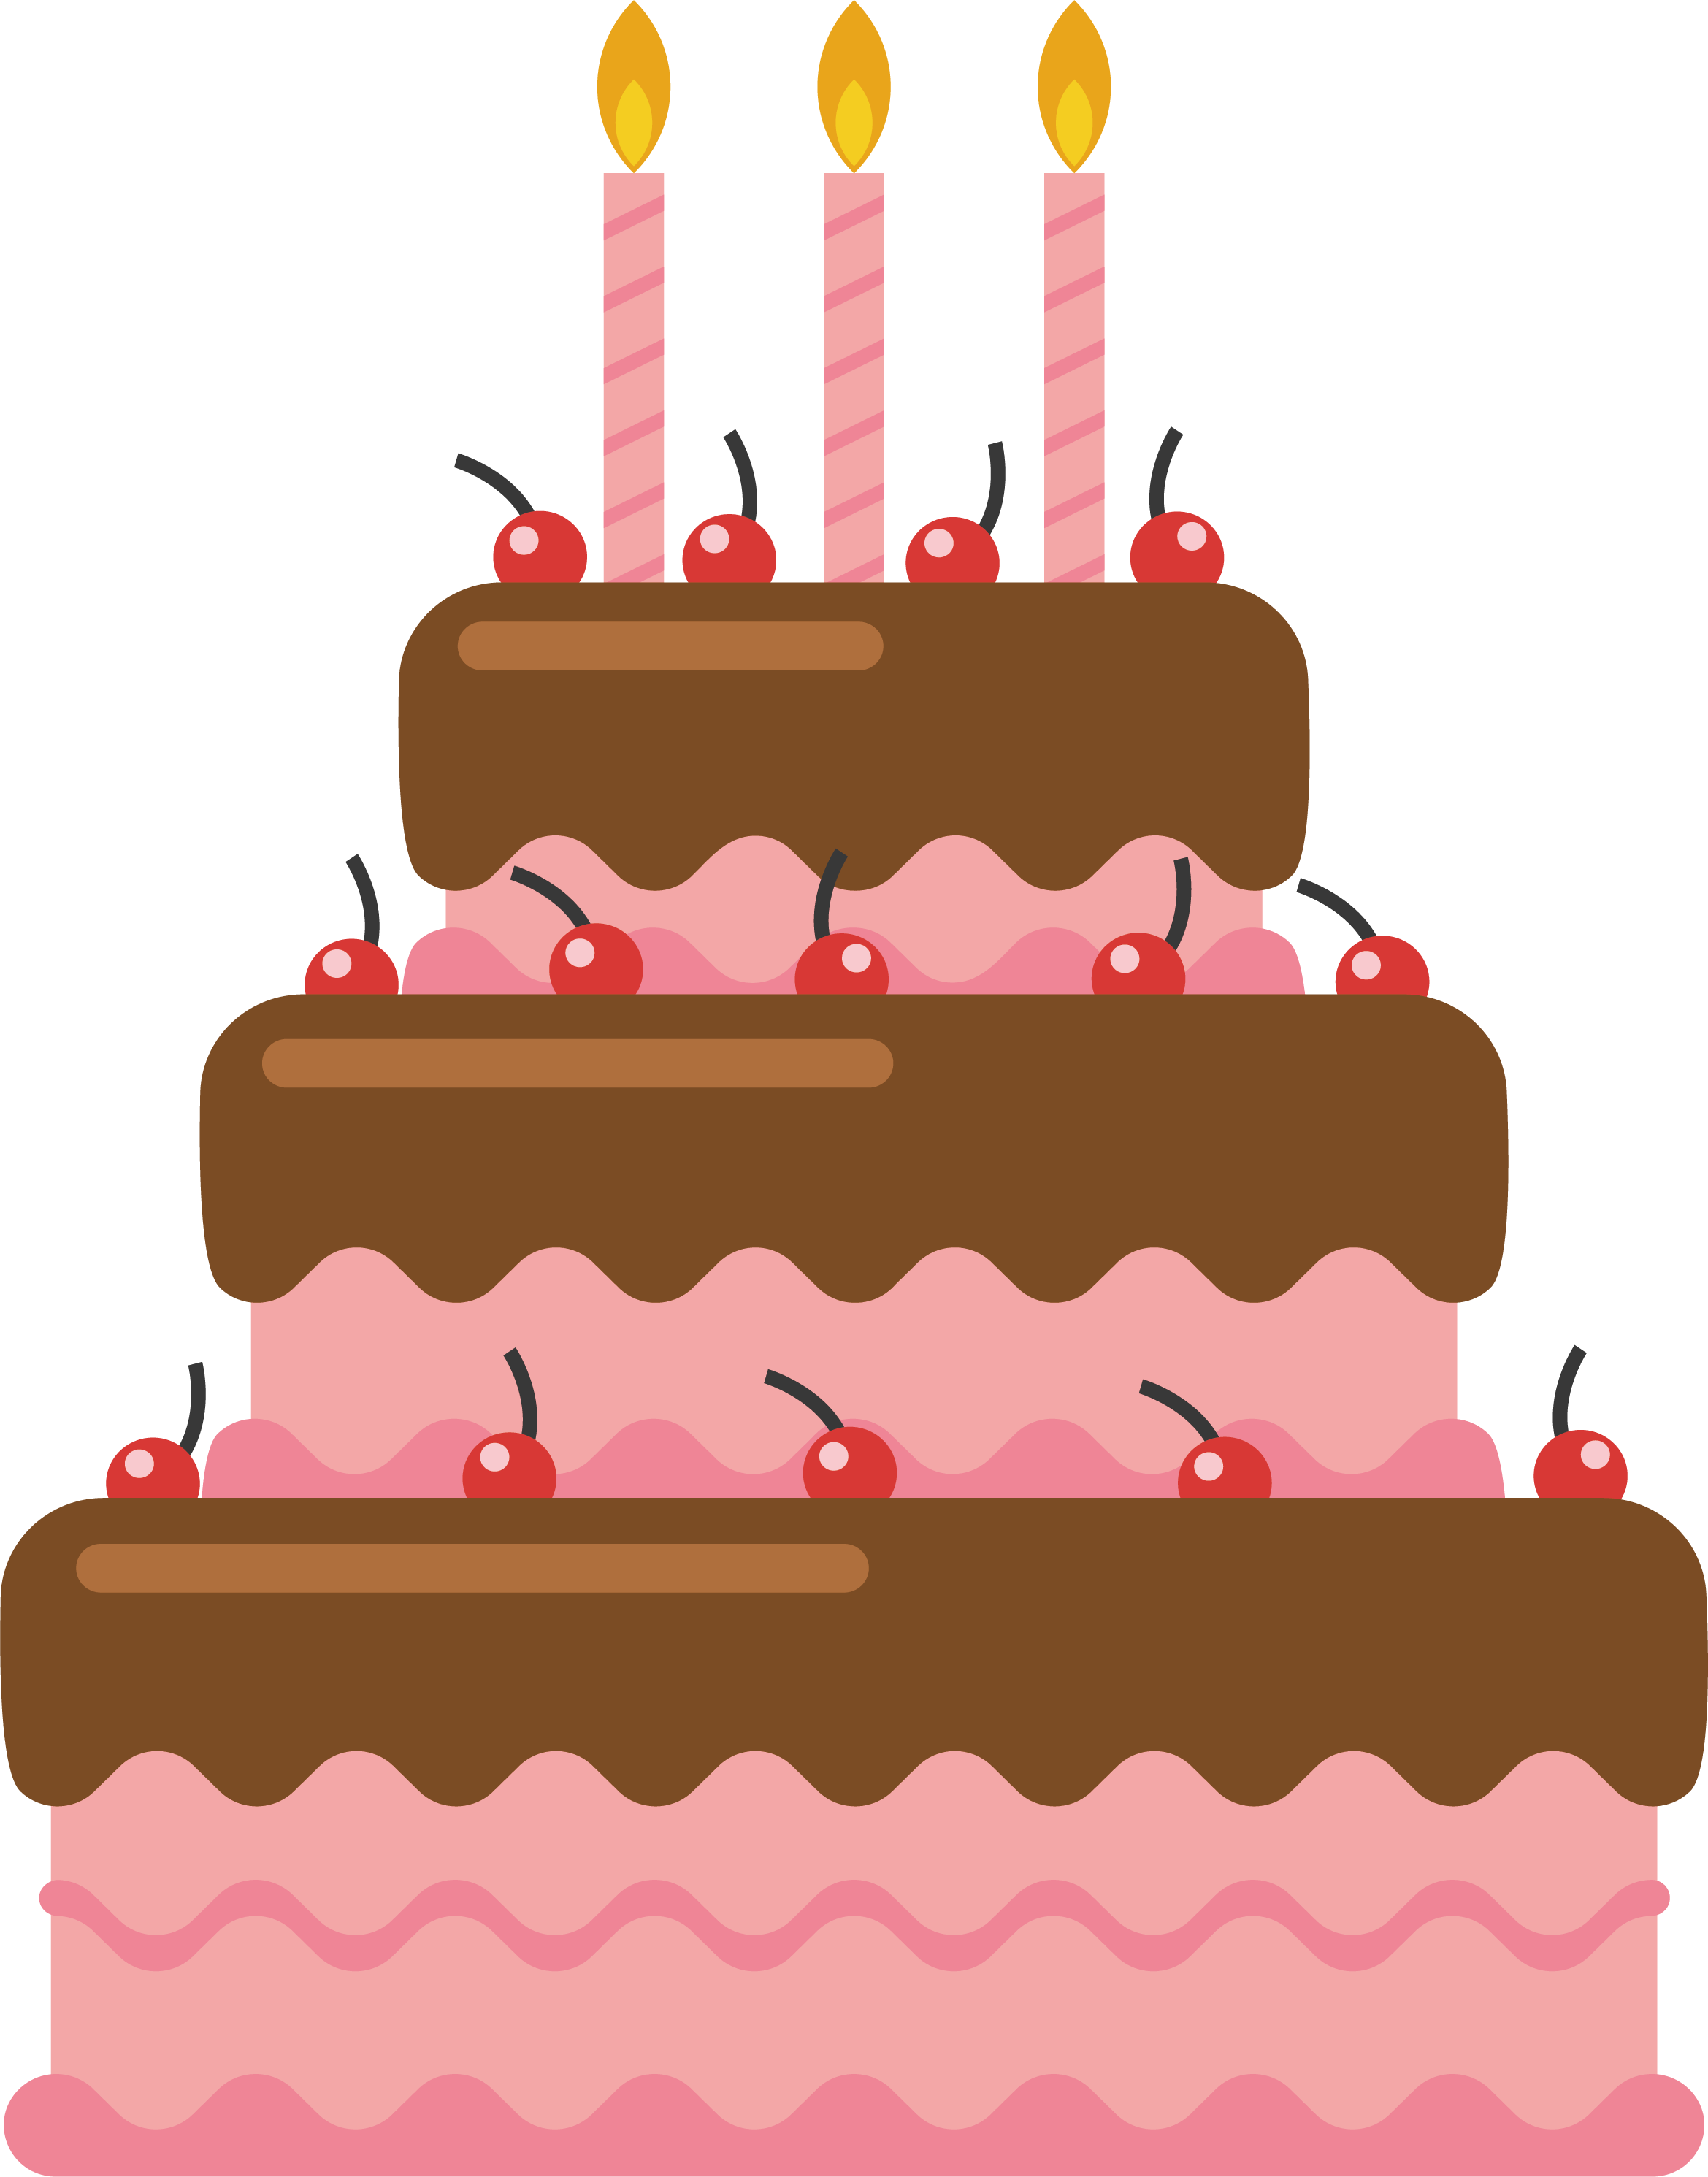 Cake In PNG Transparent Background, Free Download #26295 - FreeIconsPNG